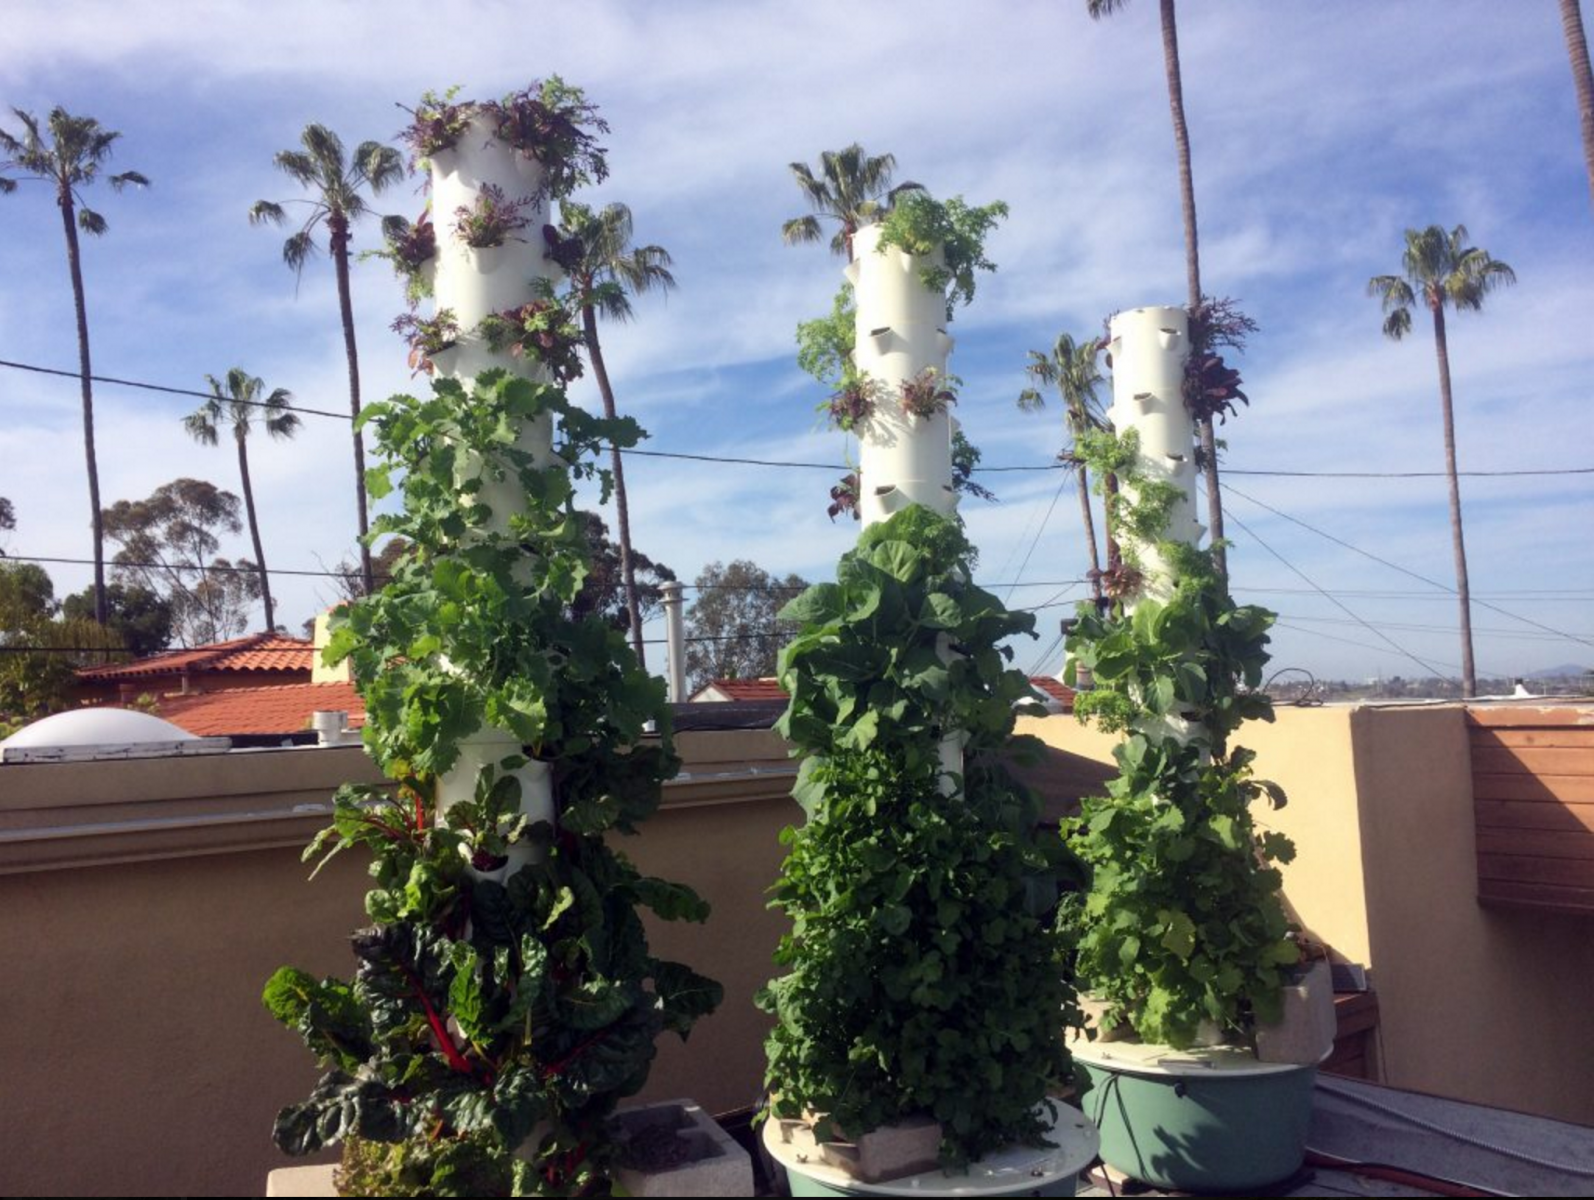 (1/2) “These plants are doing very well with Blue Gold™ Base!”